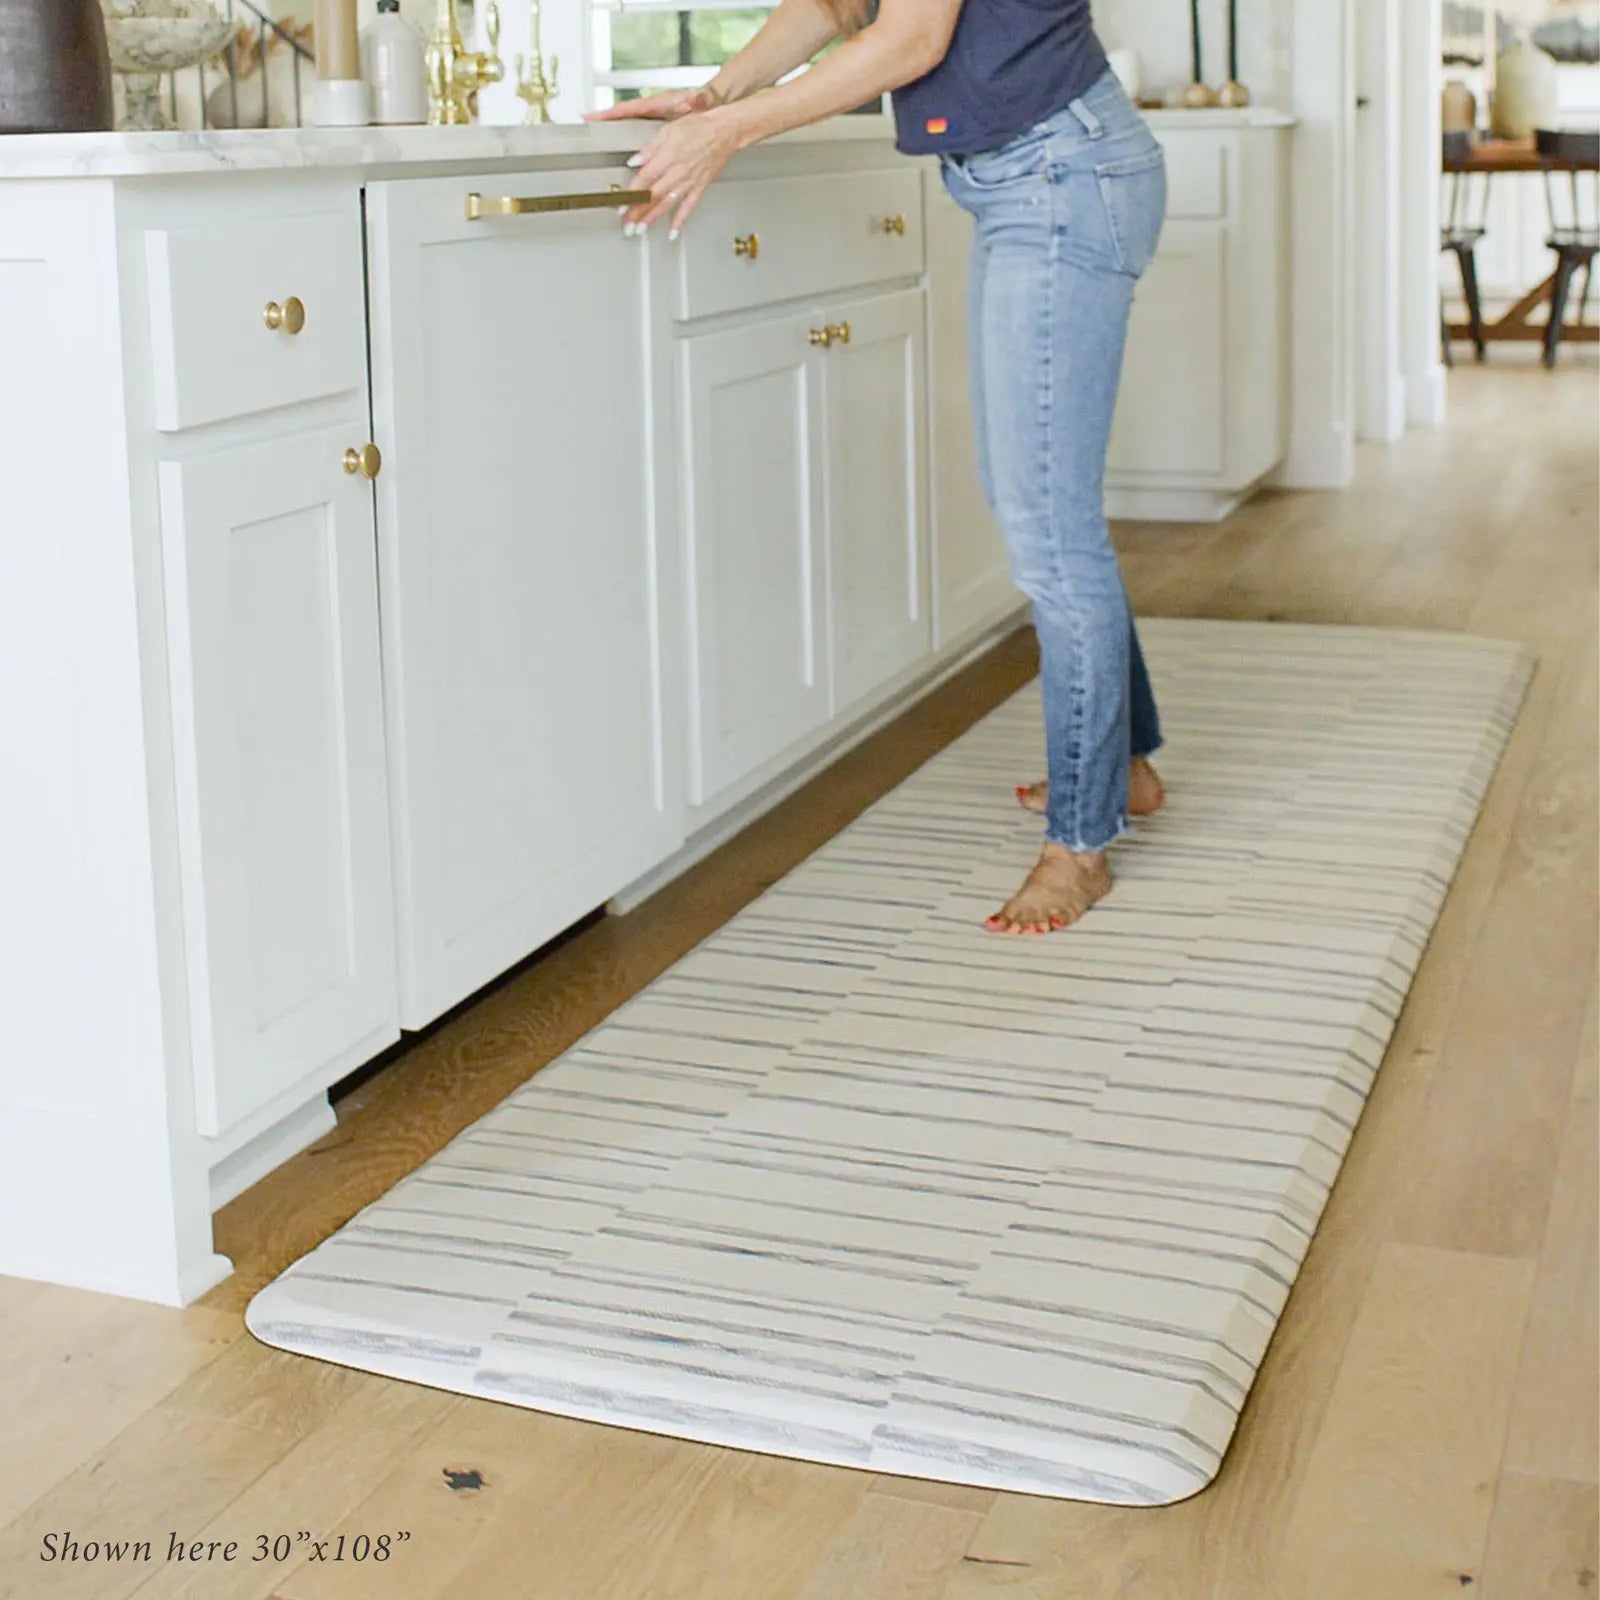 Gray and white inverted stripe kitchen mat in kitchen with woman closing dishwasher standing on size 30x108.